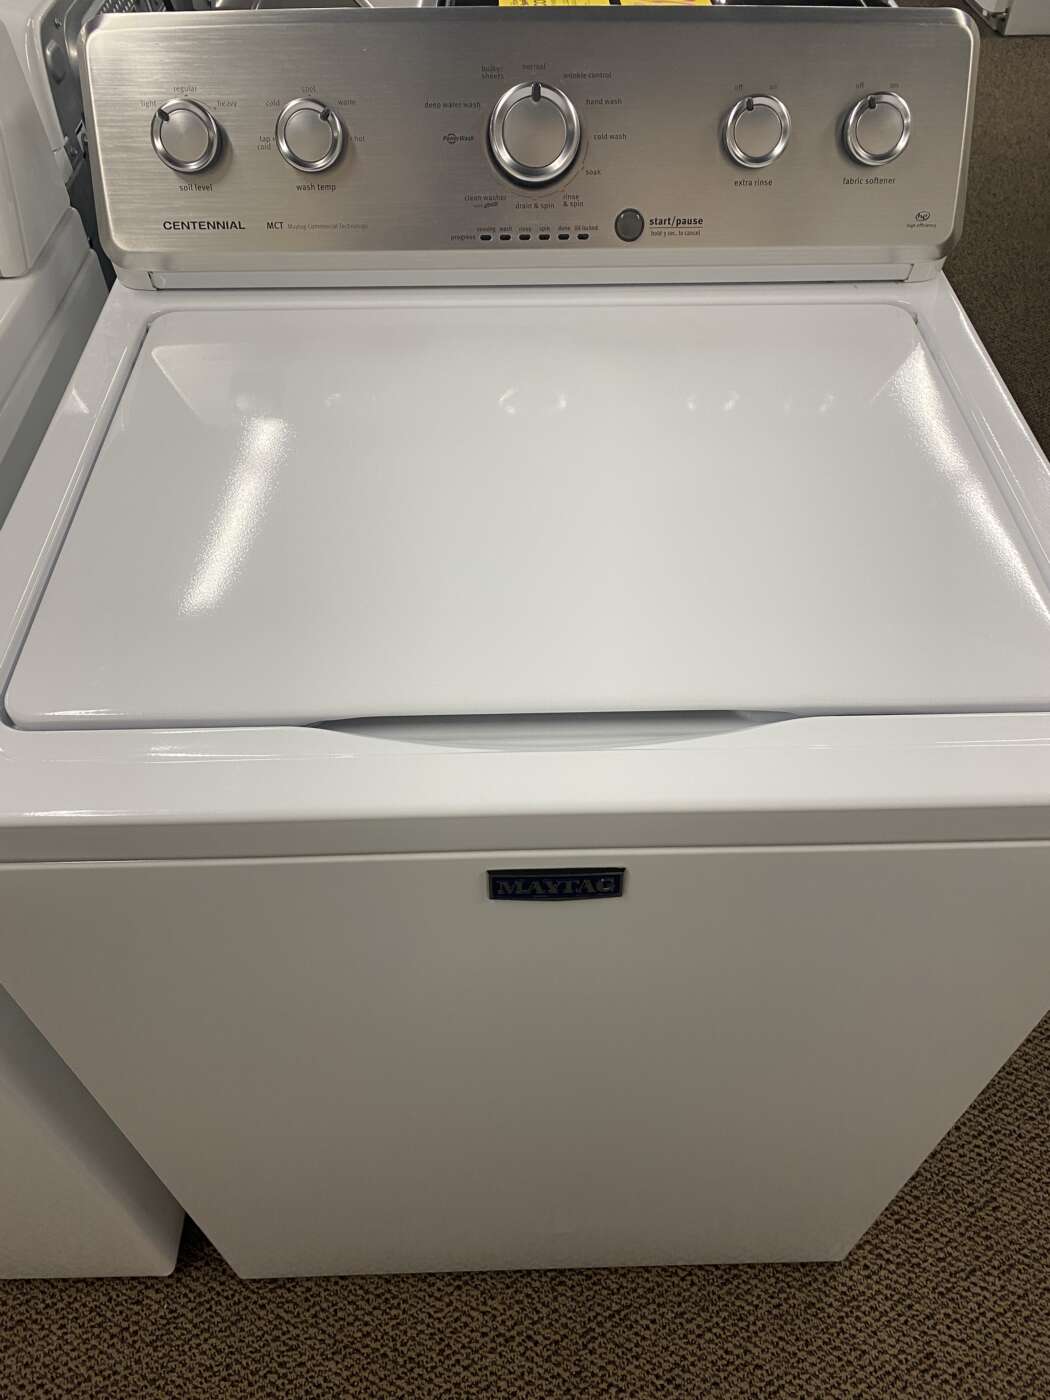 Reconditioned MAYTAG 4.5 CU. Ft. Top-Load Washer